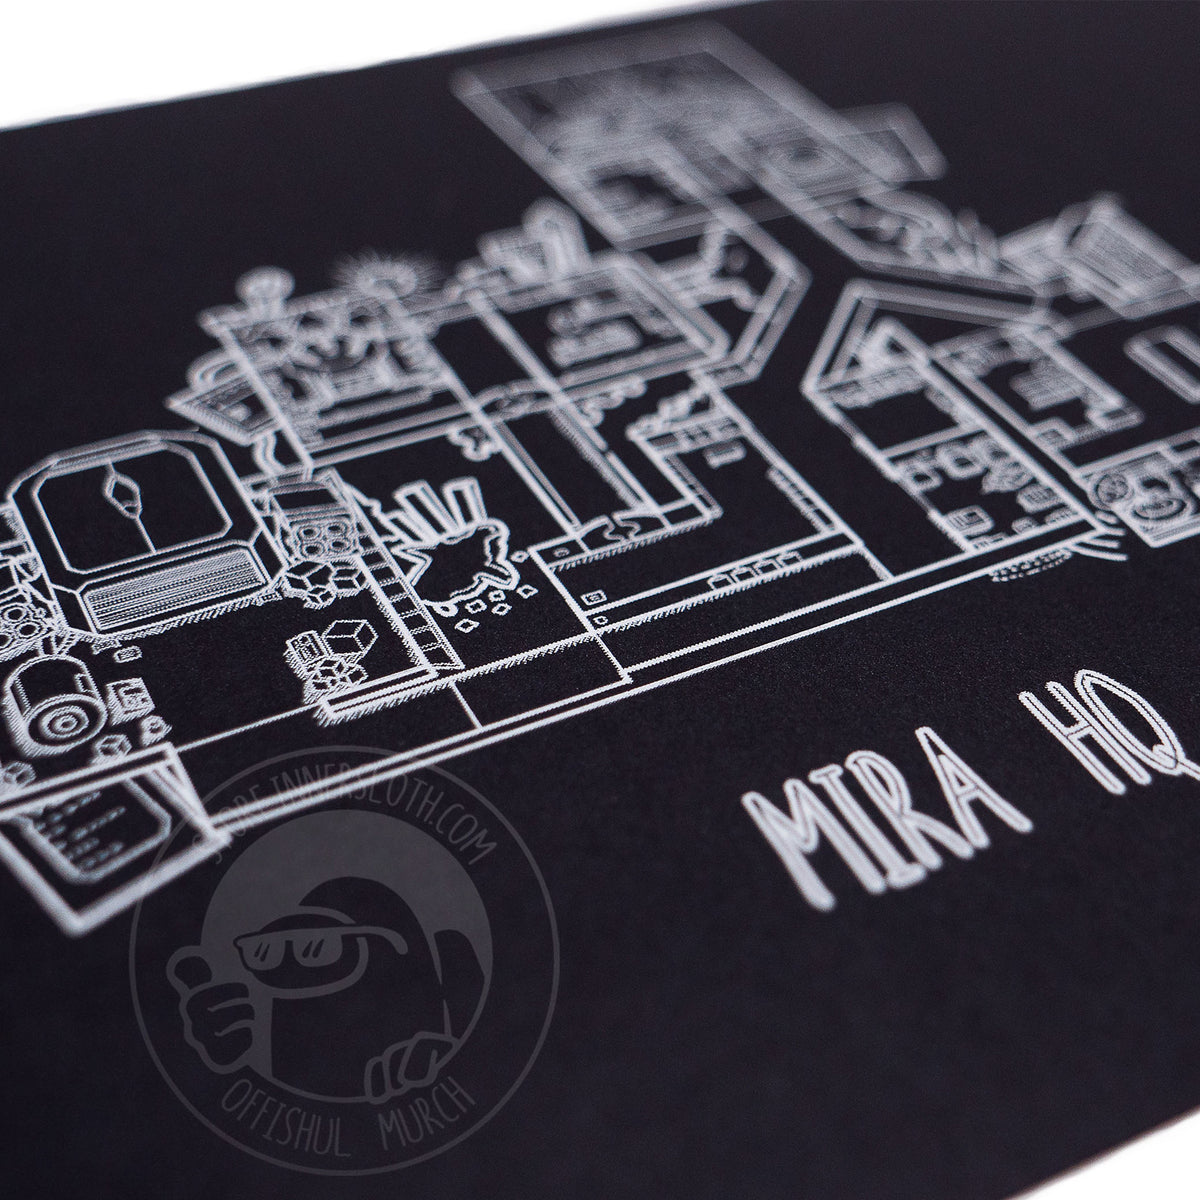 A close up photograph of the Mira HQ map print